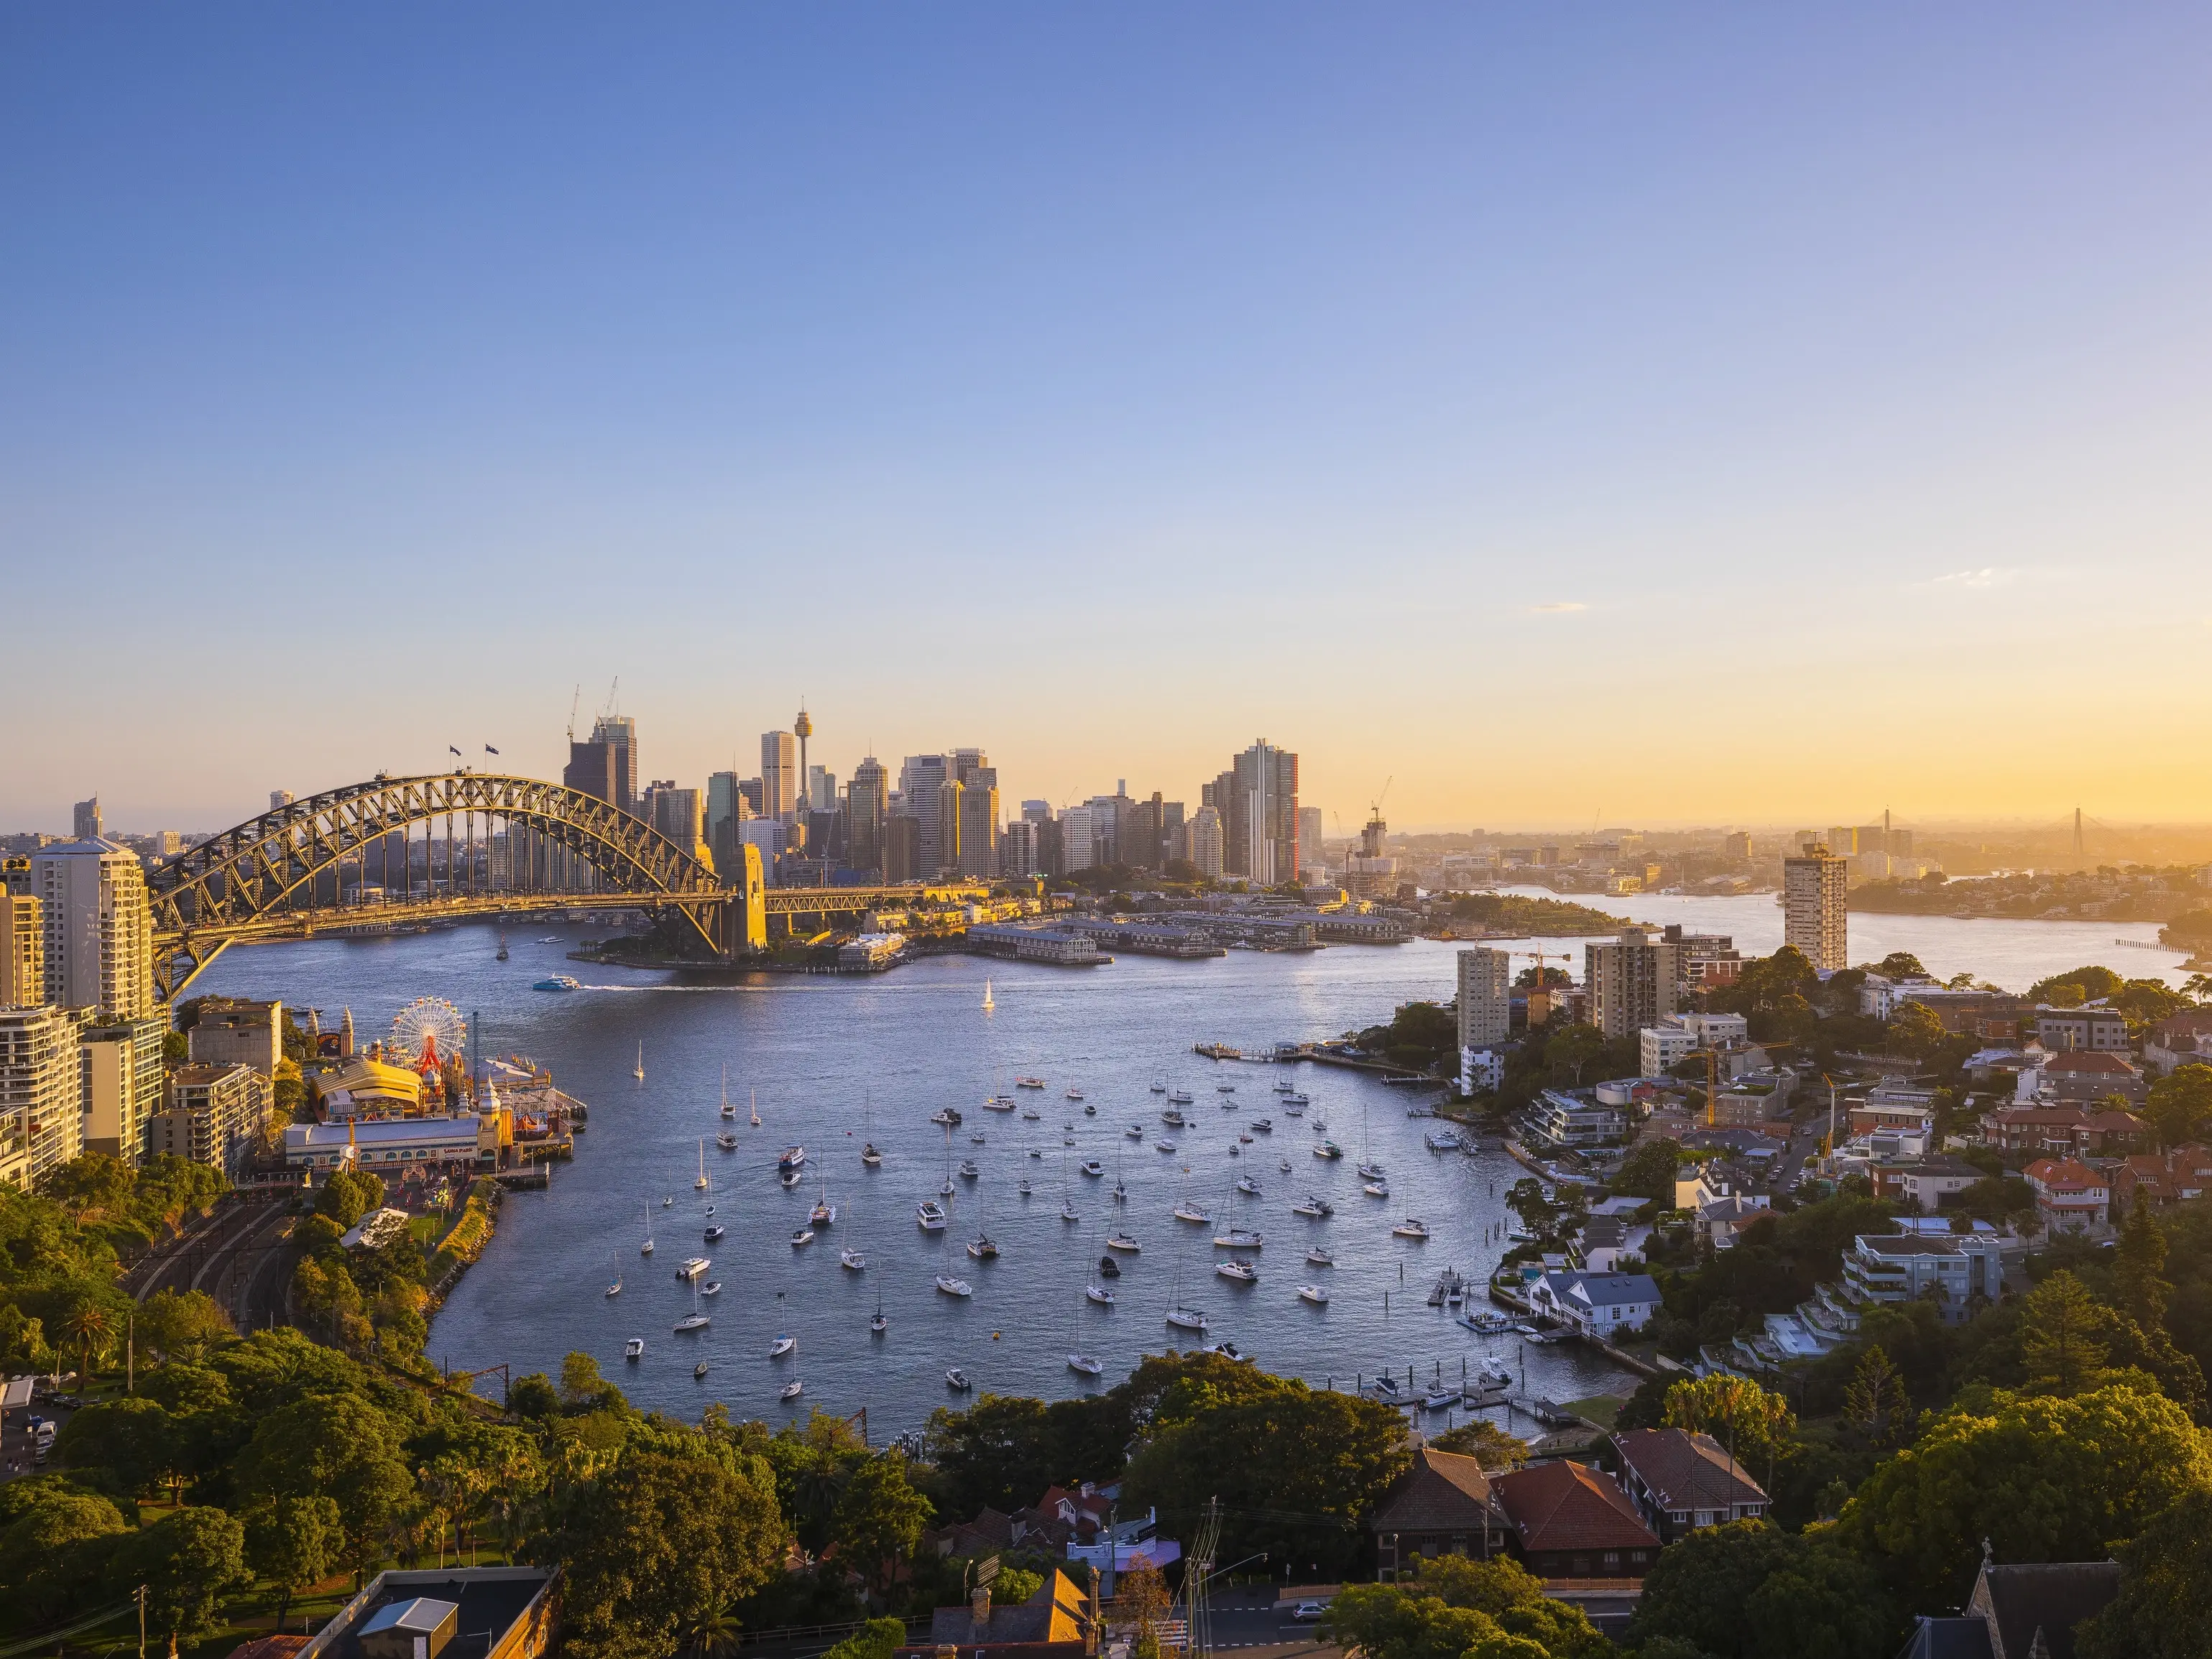 View of sun setting over Sydney Harbour from Harbourview Hotel, North Sydney. Image credit: Destination NSW